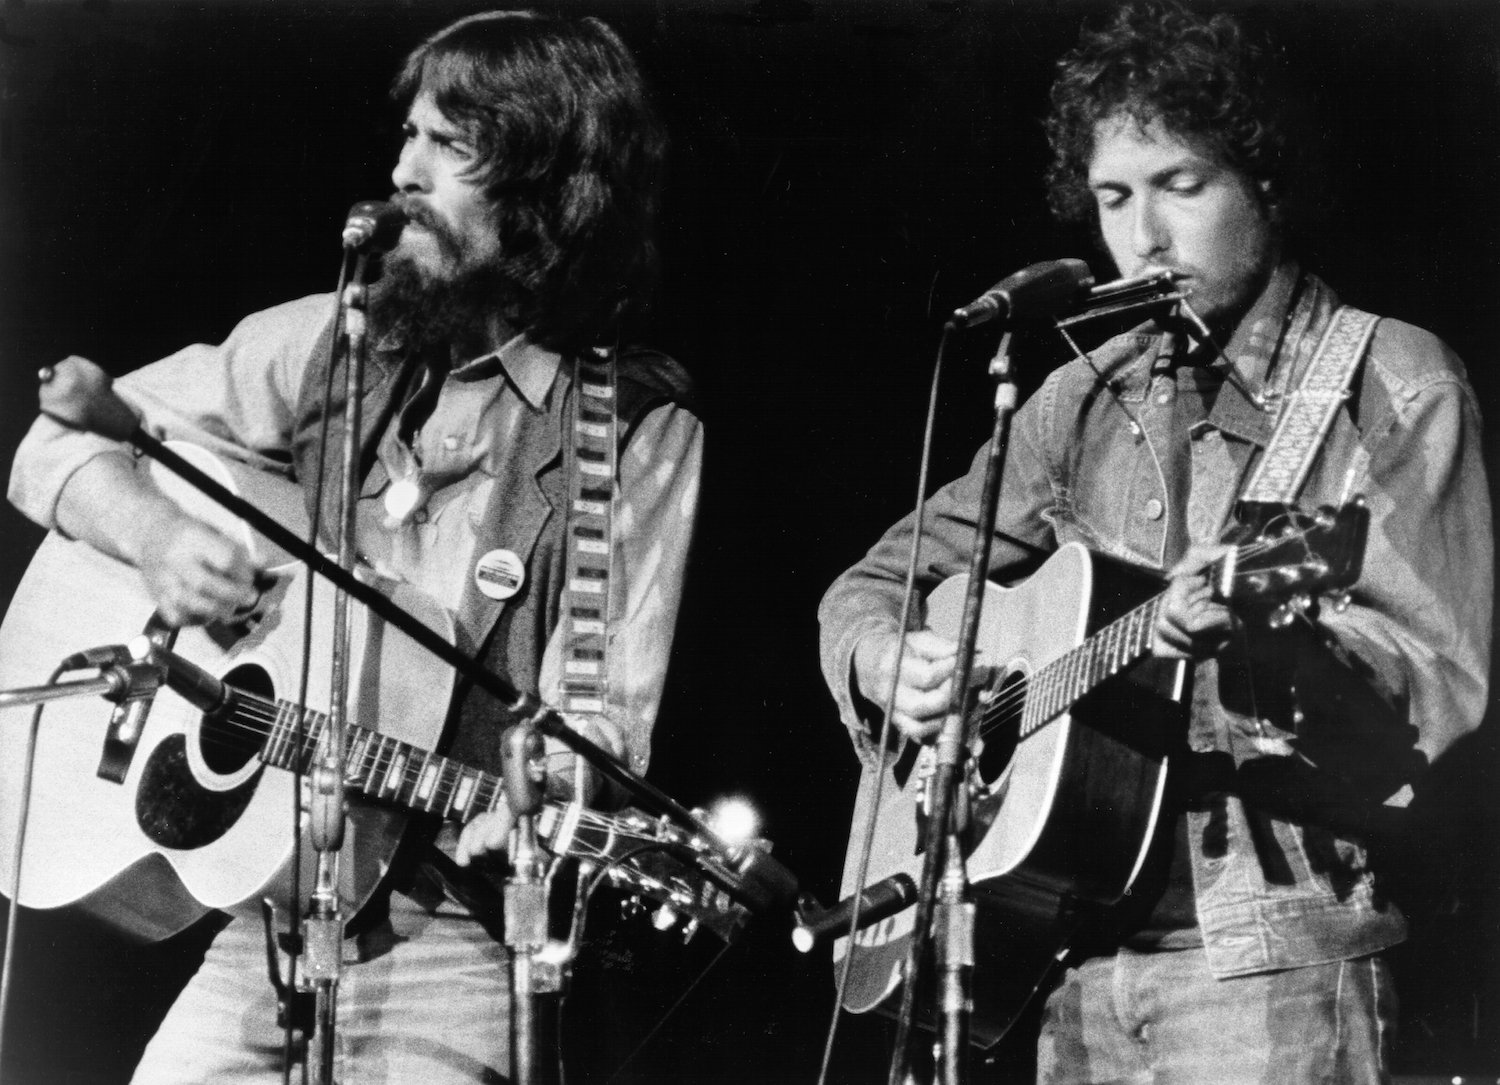 George Harrison and Bob Dylan perform at the Concert for Bangladesh in New York City